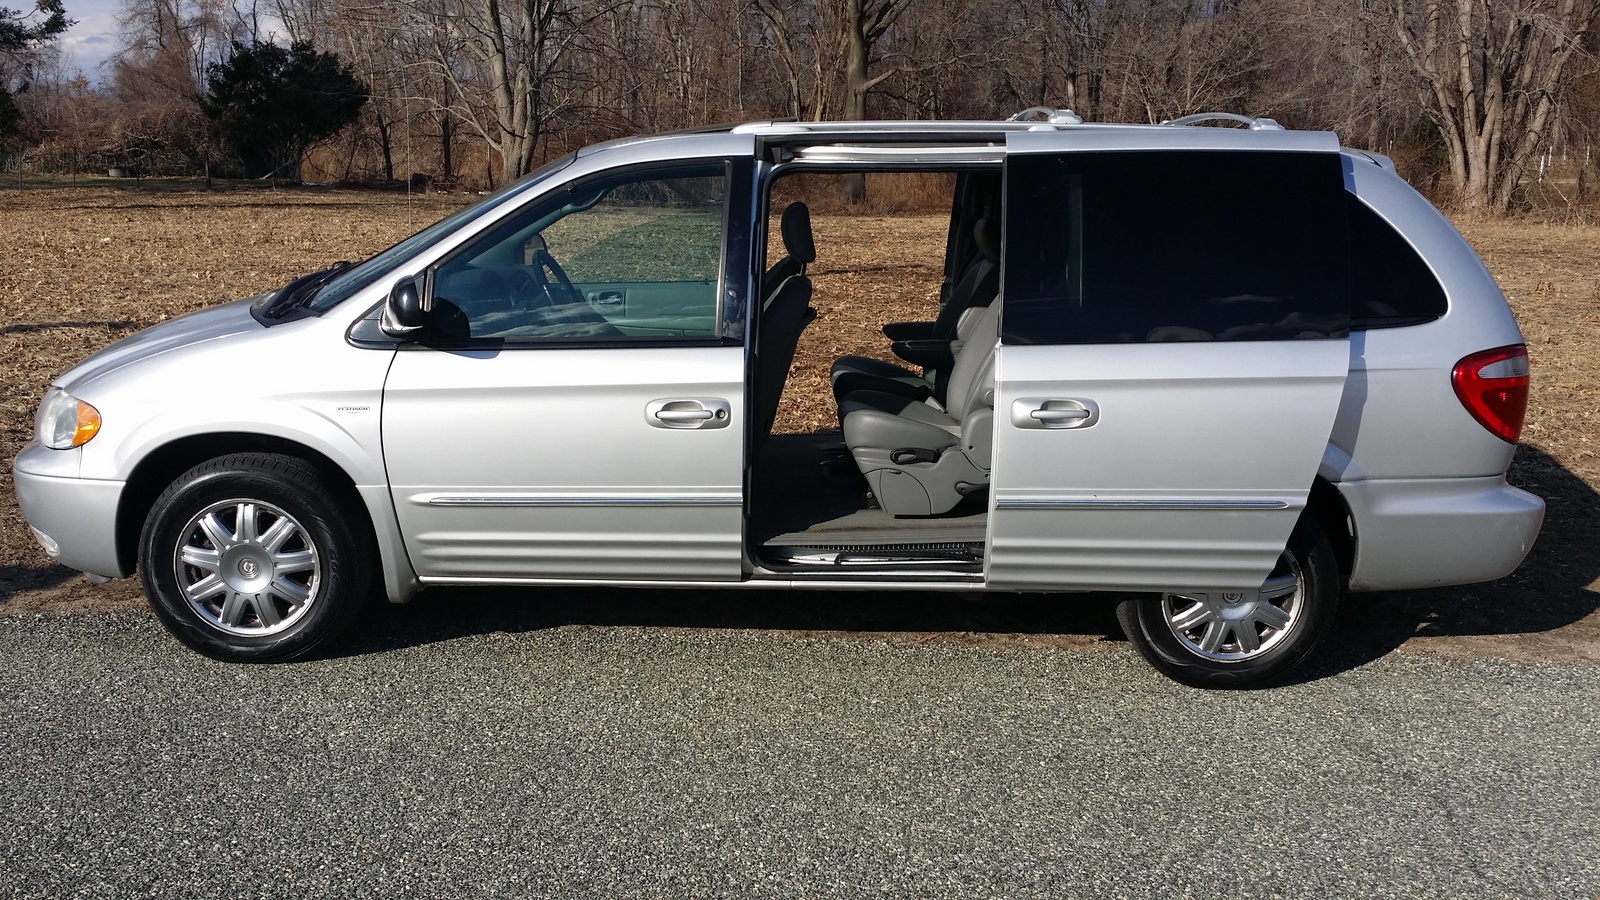 2005 Chrysler town and country lx wheelbase #5